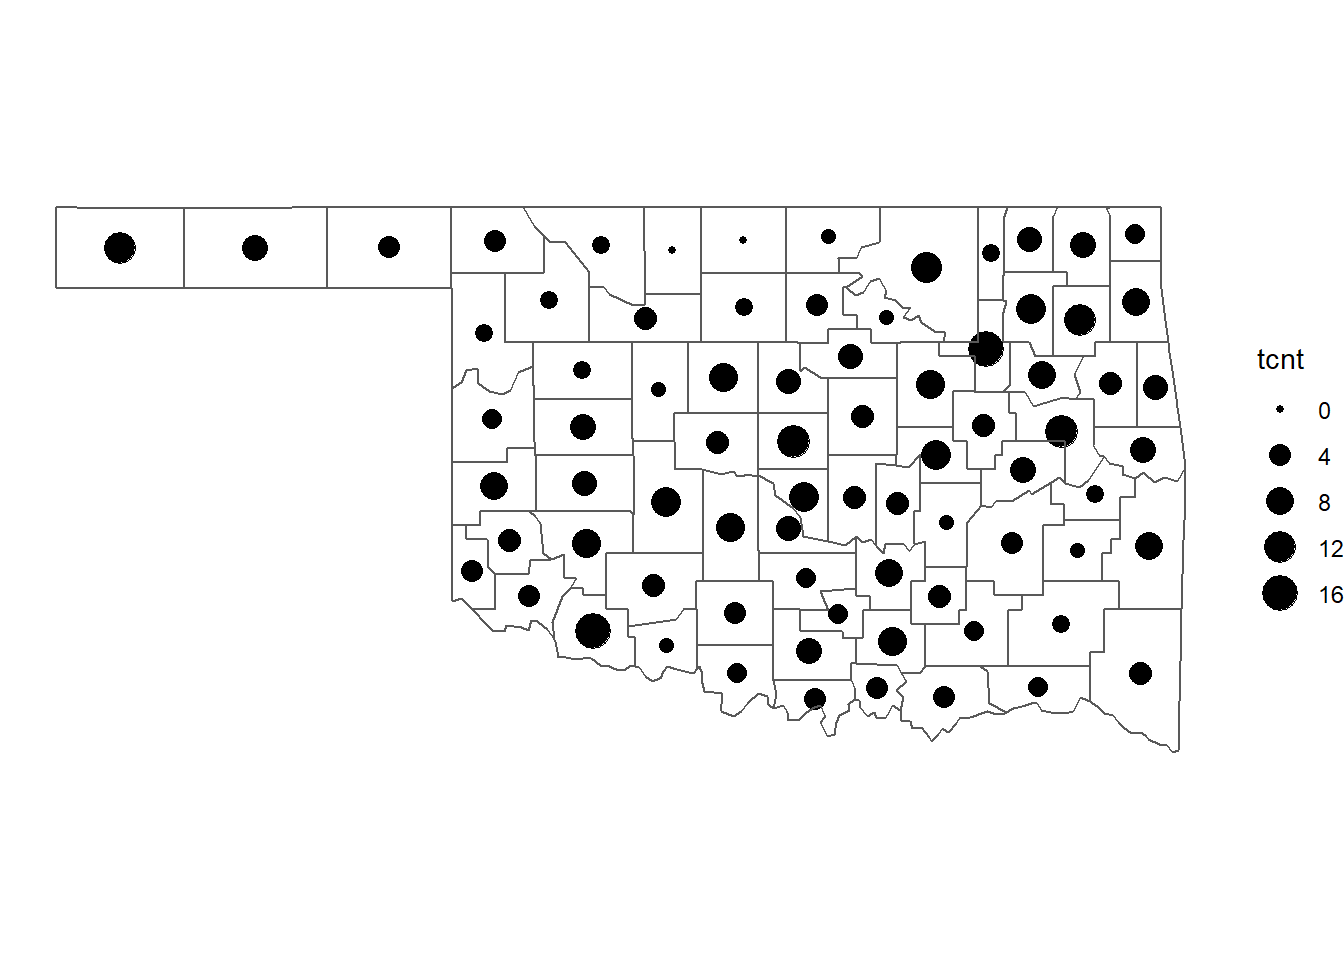 Numbers of tornadoes in Oklahoma counties from 2016-2021 mapped as graduated symbols.